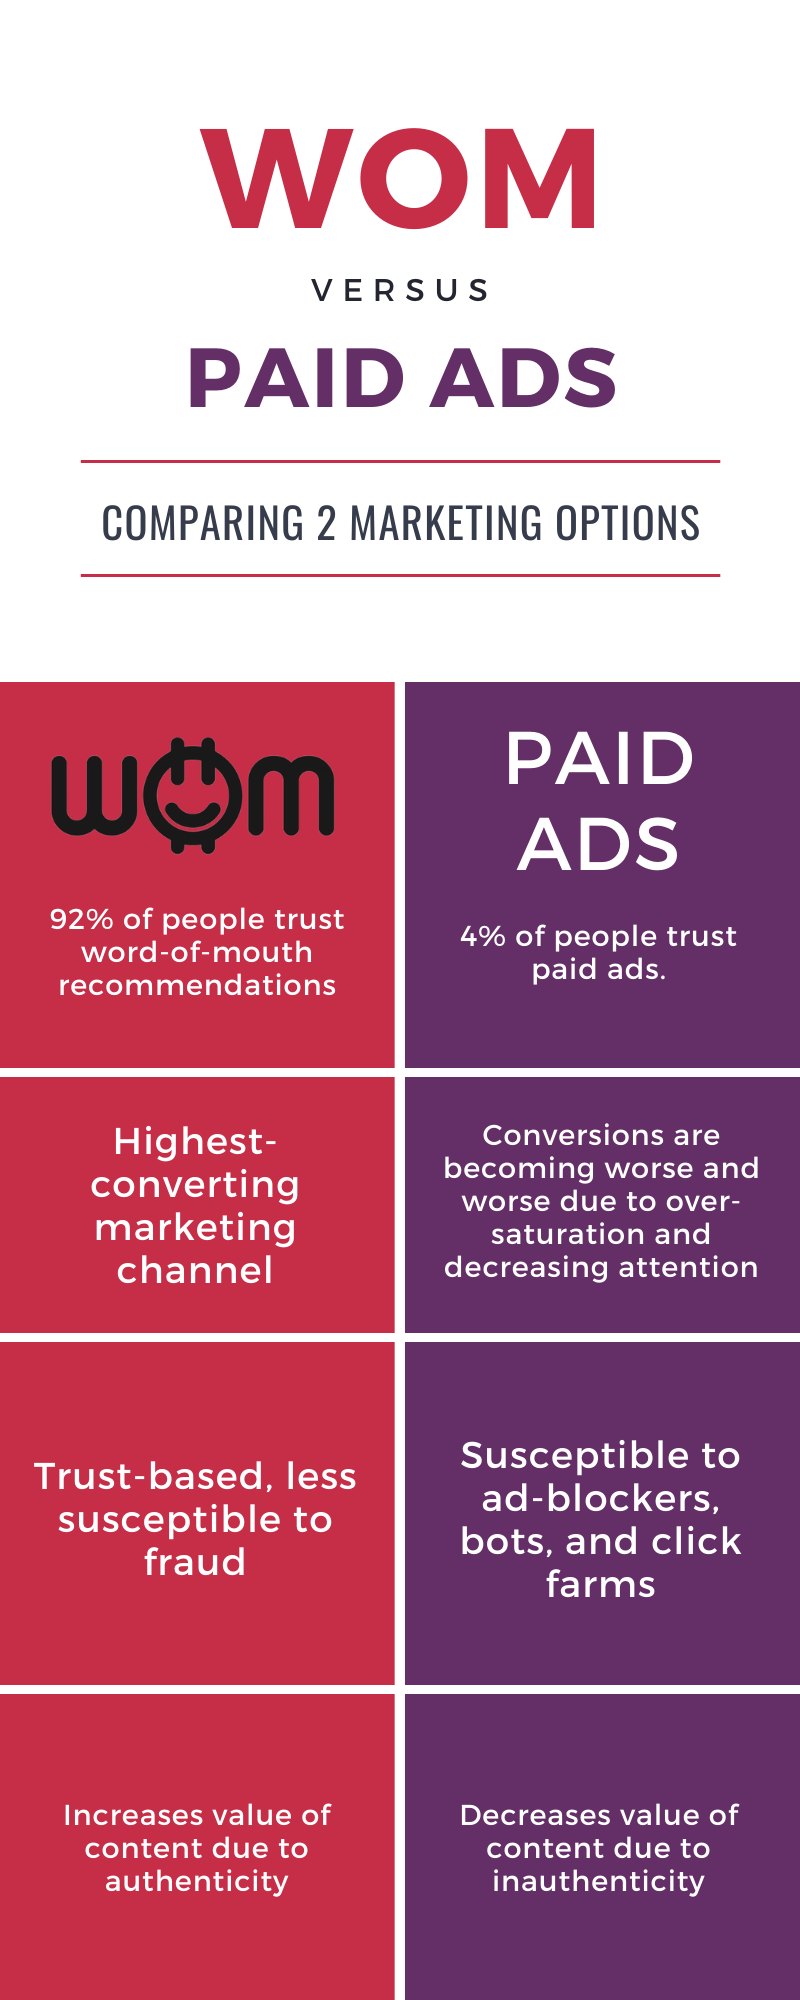 Word-of-Mouth (WOM) Marketing vs Paid Ads [Infographic]